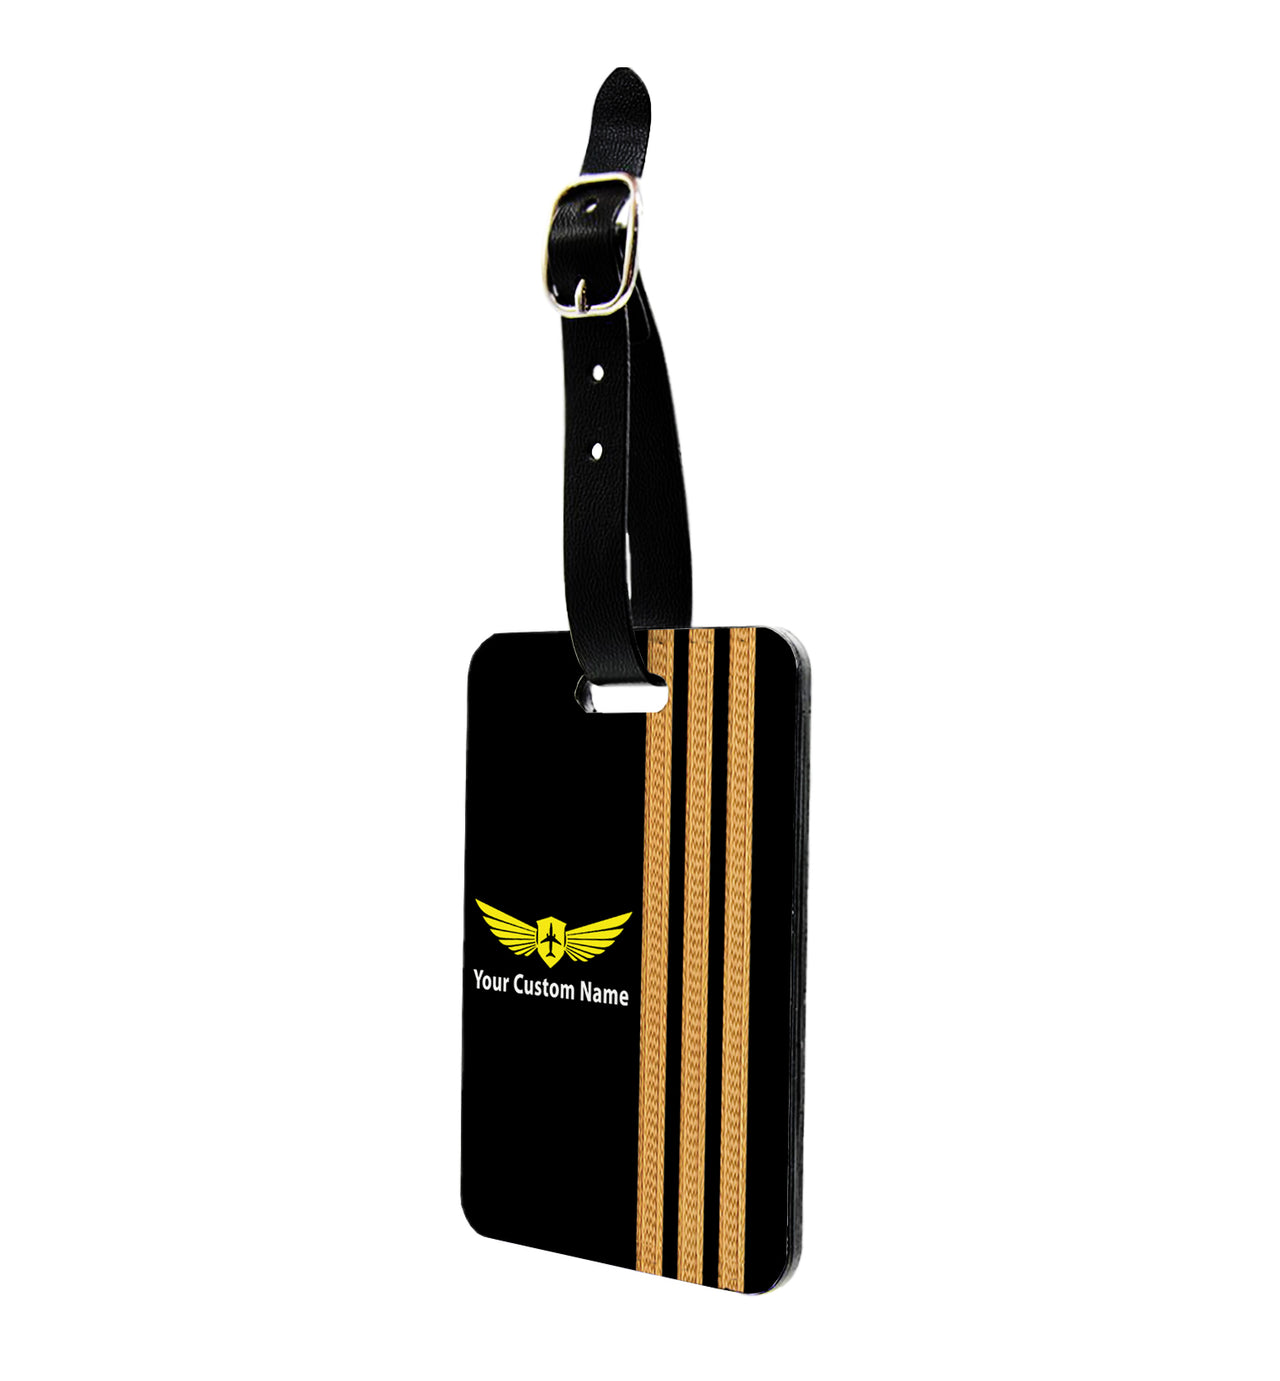 Customizable Name & Badge & Golden Special Pilot Epaulettes (4,3,2 Lines) Designed Luggage Tag